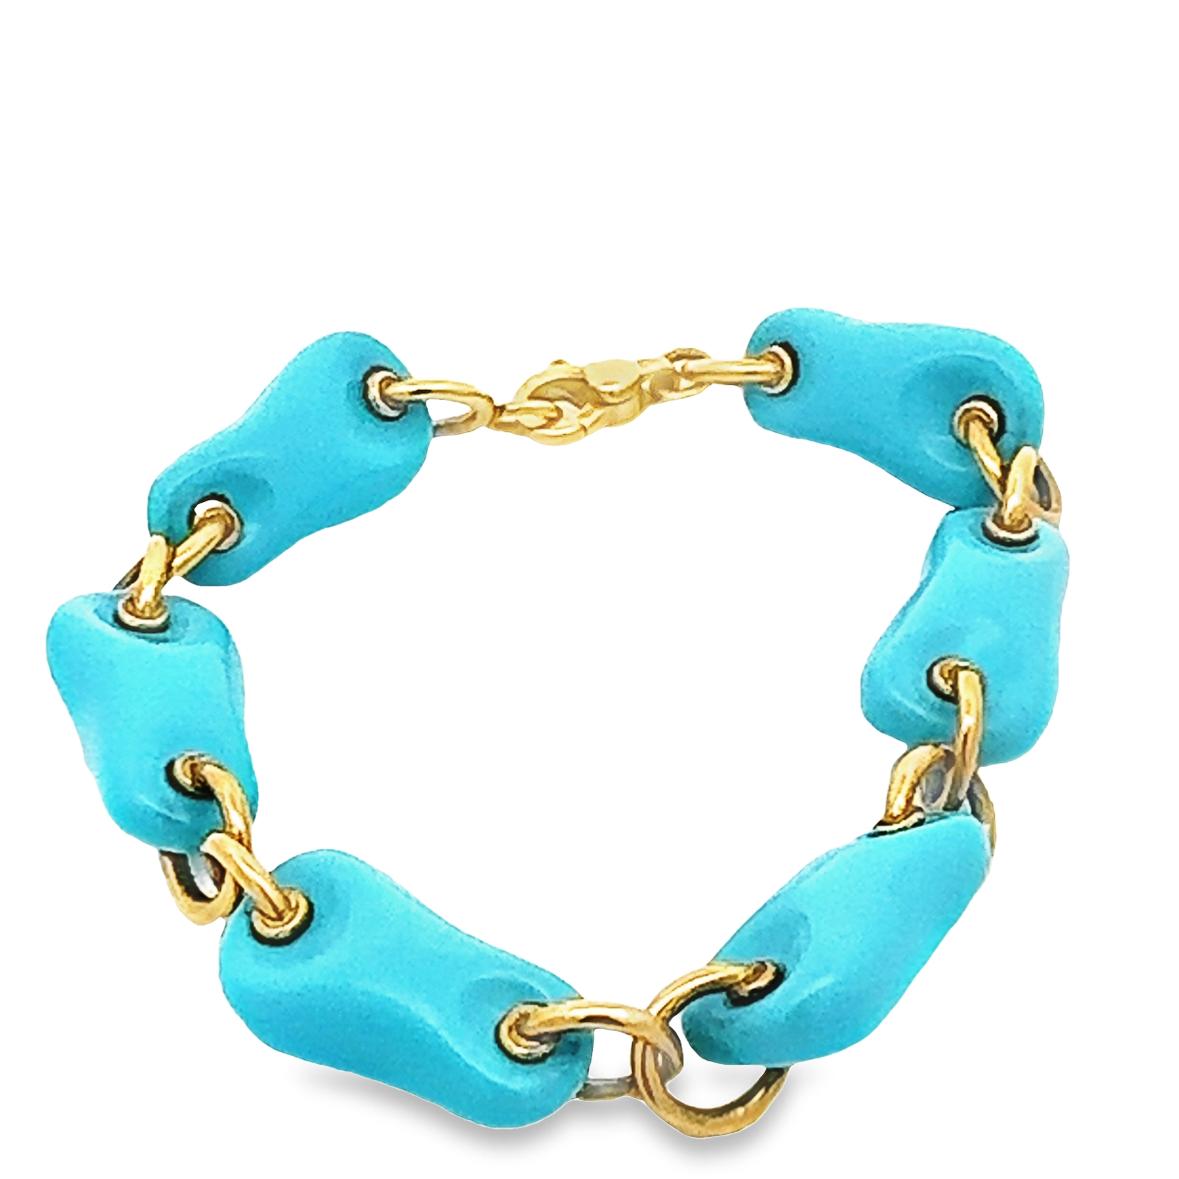 This bold Italian natural turquoise bracelet delivers a modern attitude. Offered by Alex & Co, 6 tumbled pieces of rare, natural, untreated turquoise. These special high-quality gemstones are connected by 18 karat solid yellow gold rounded links.